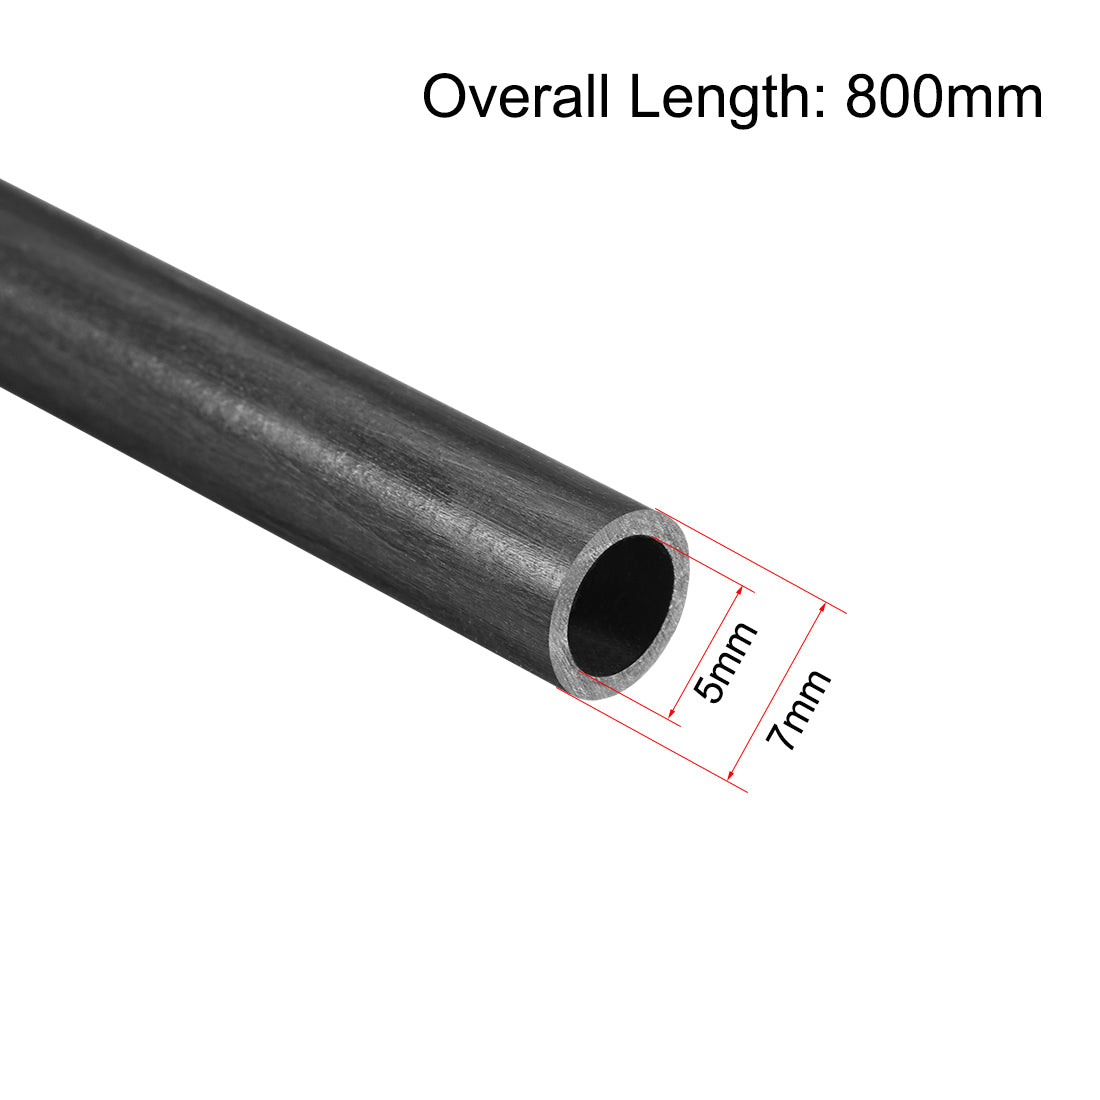 uxcell Uxcell Carbon Fiber Round Tube 7mm x 5mm x 800mm Carbon Fiber Wing Pultrusion Tubing for RC Airplane Quadcopter